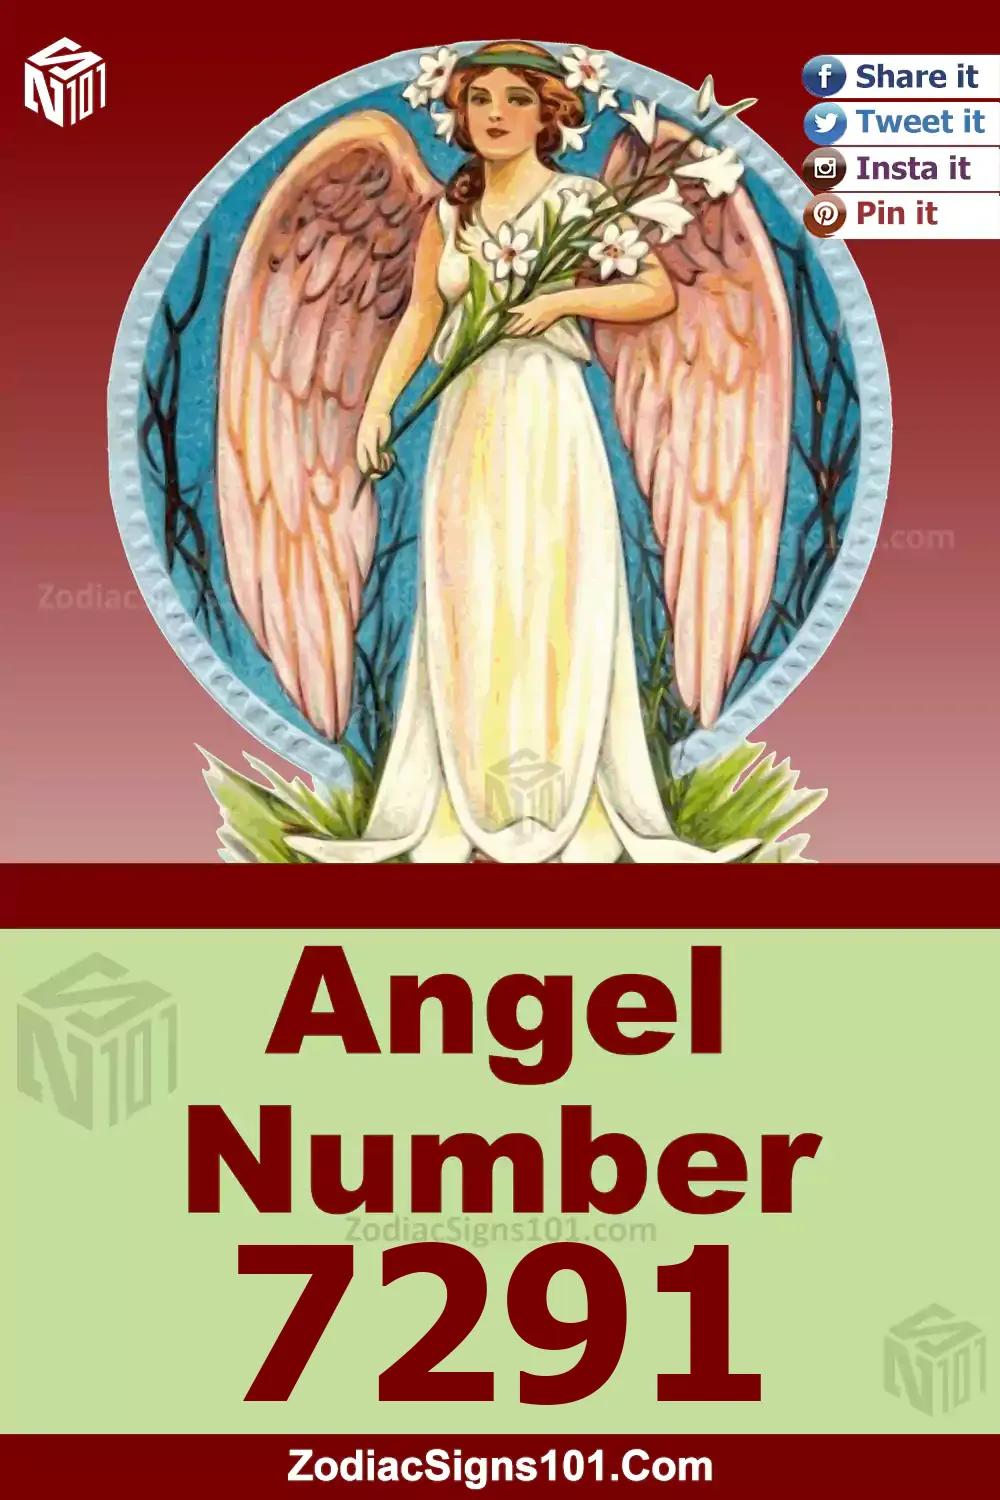 7291 Angel Number Meaning